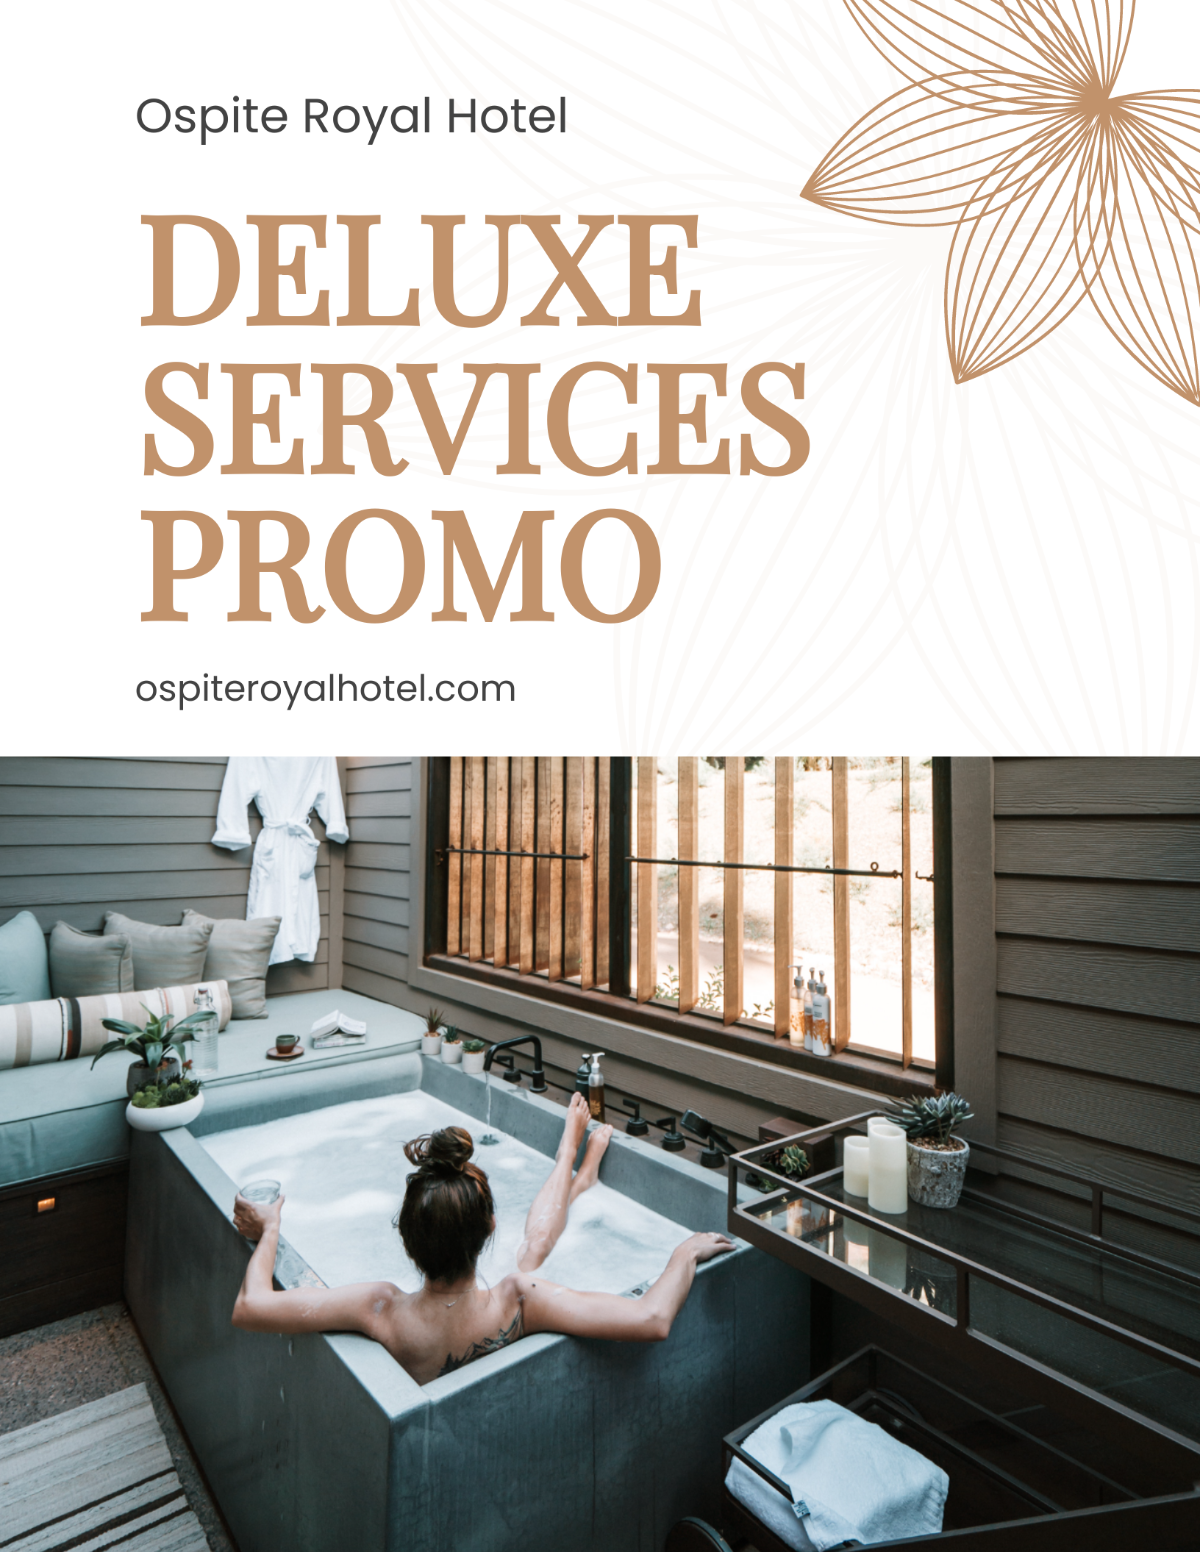 Hotel Service Promotion Flyer Template